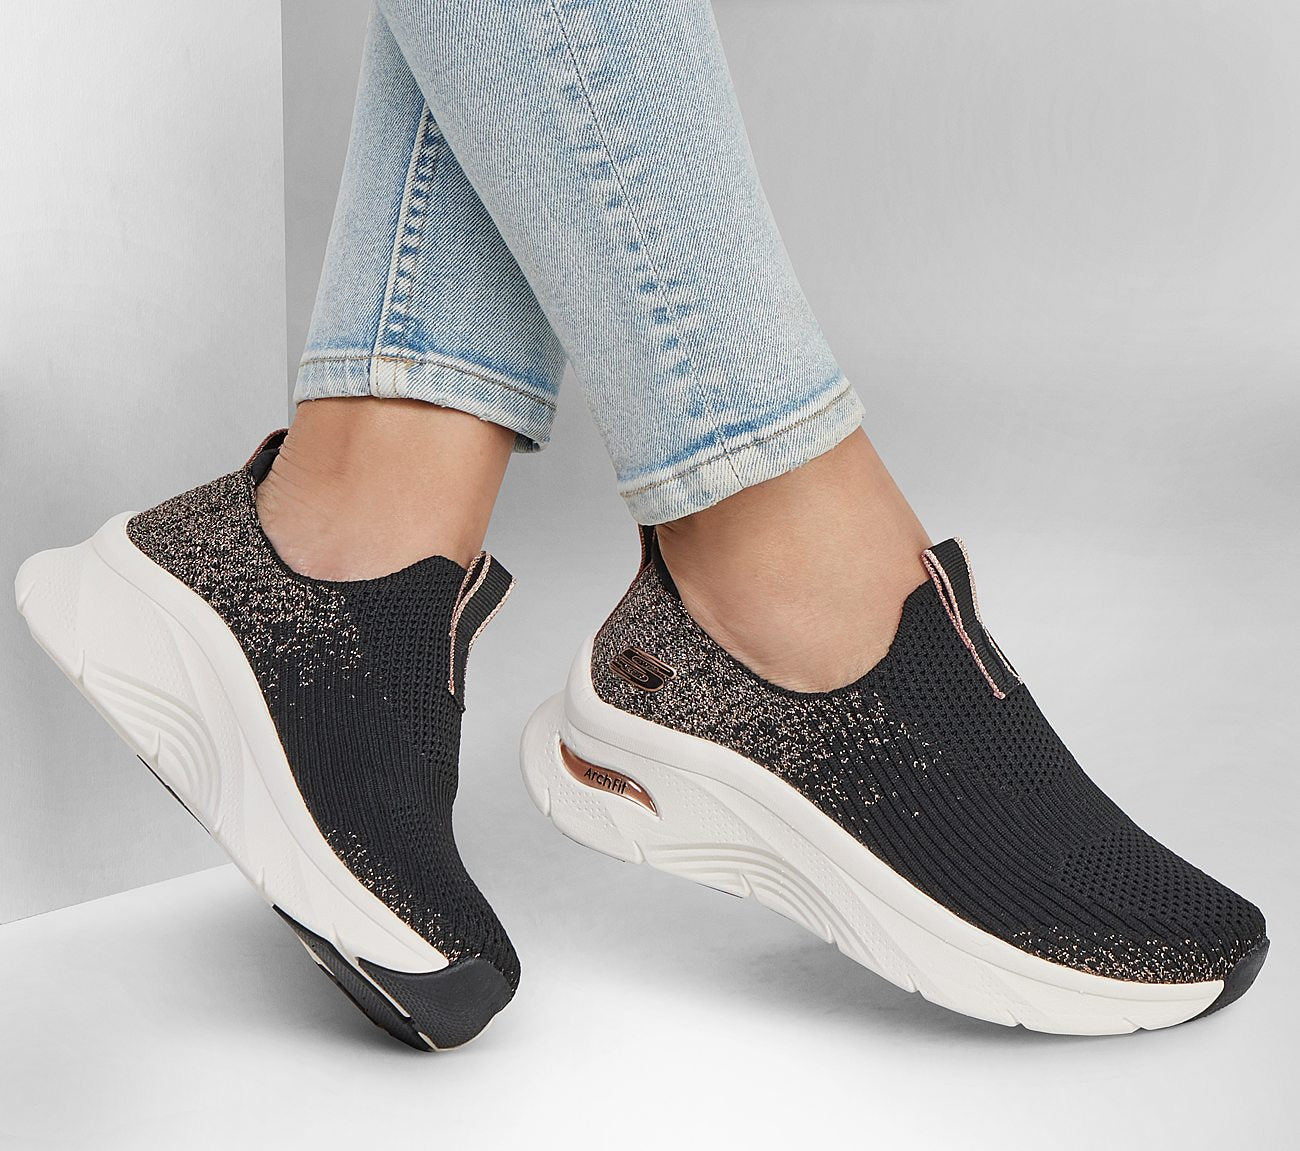 mikroskopisk plade hinanden Relaxed Fit: Arch Fit D'Lux - Glimmer Dust – Skechers.dk